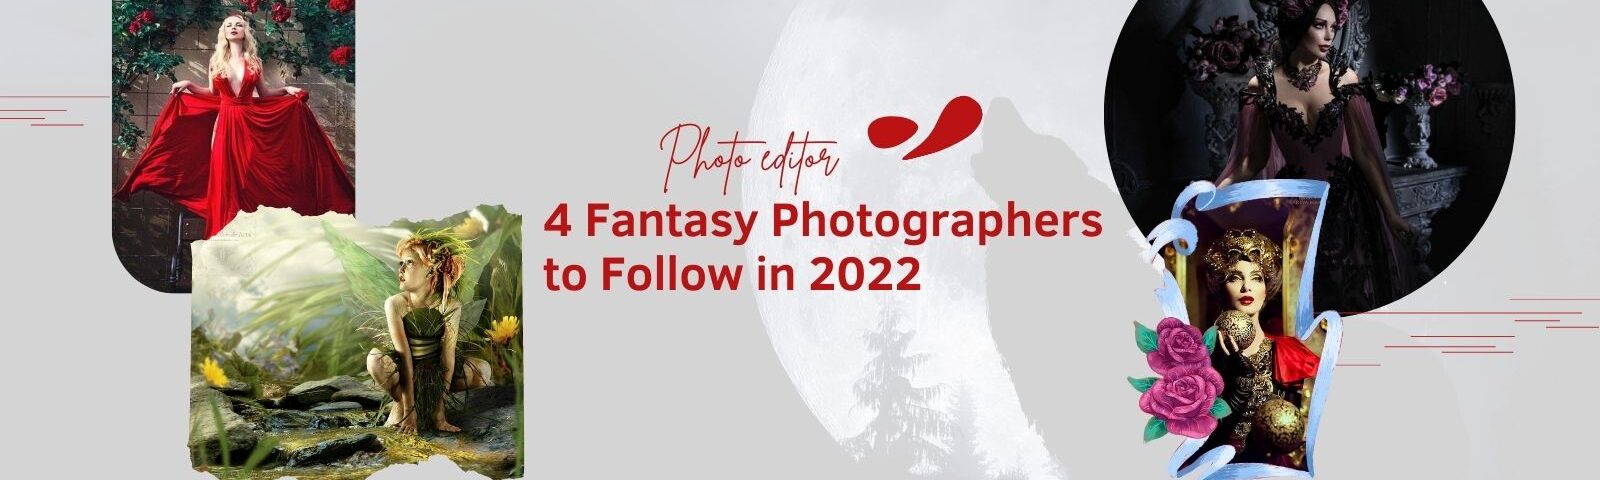 5 Fant4 Photographers to Follow in 2022